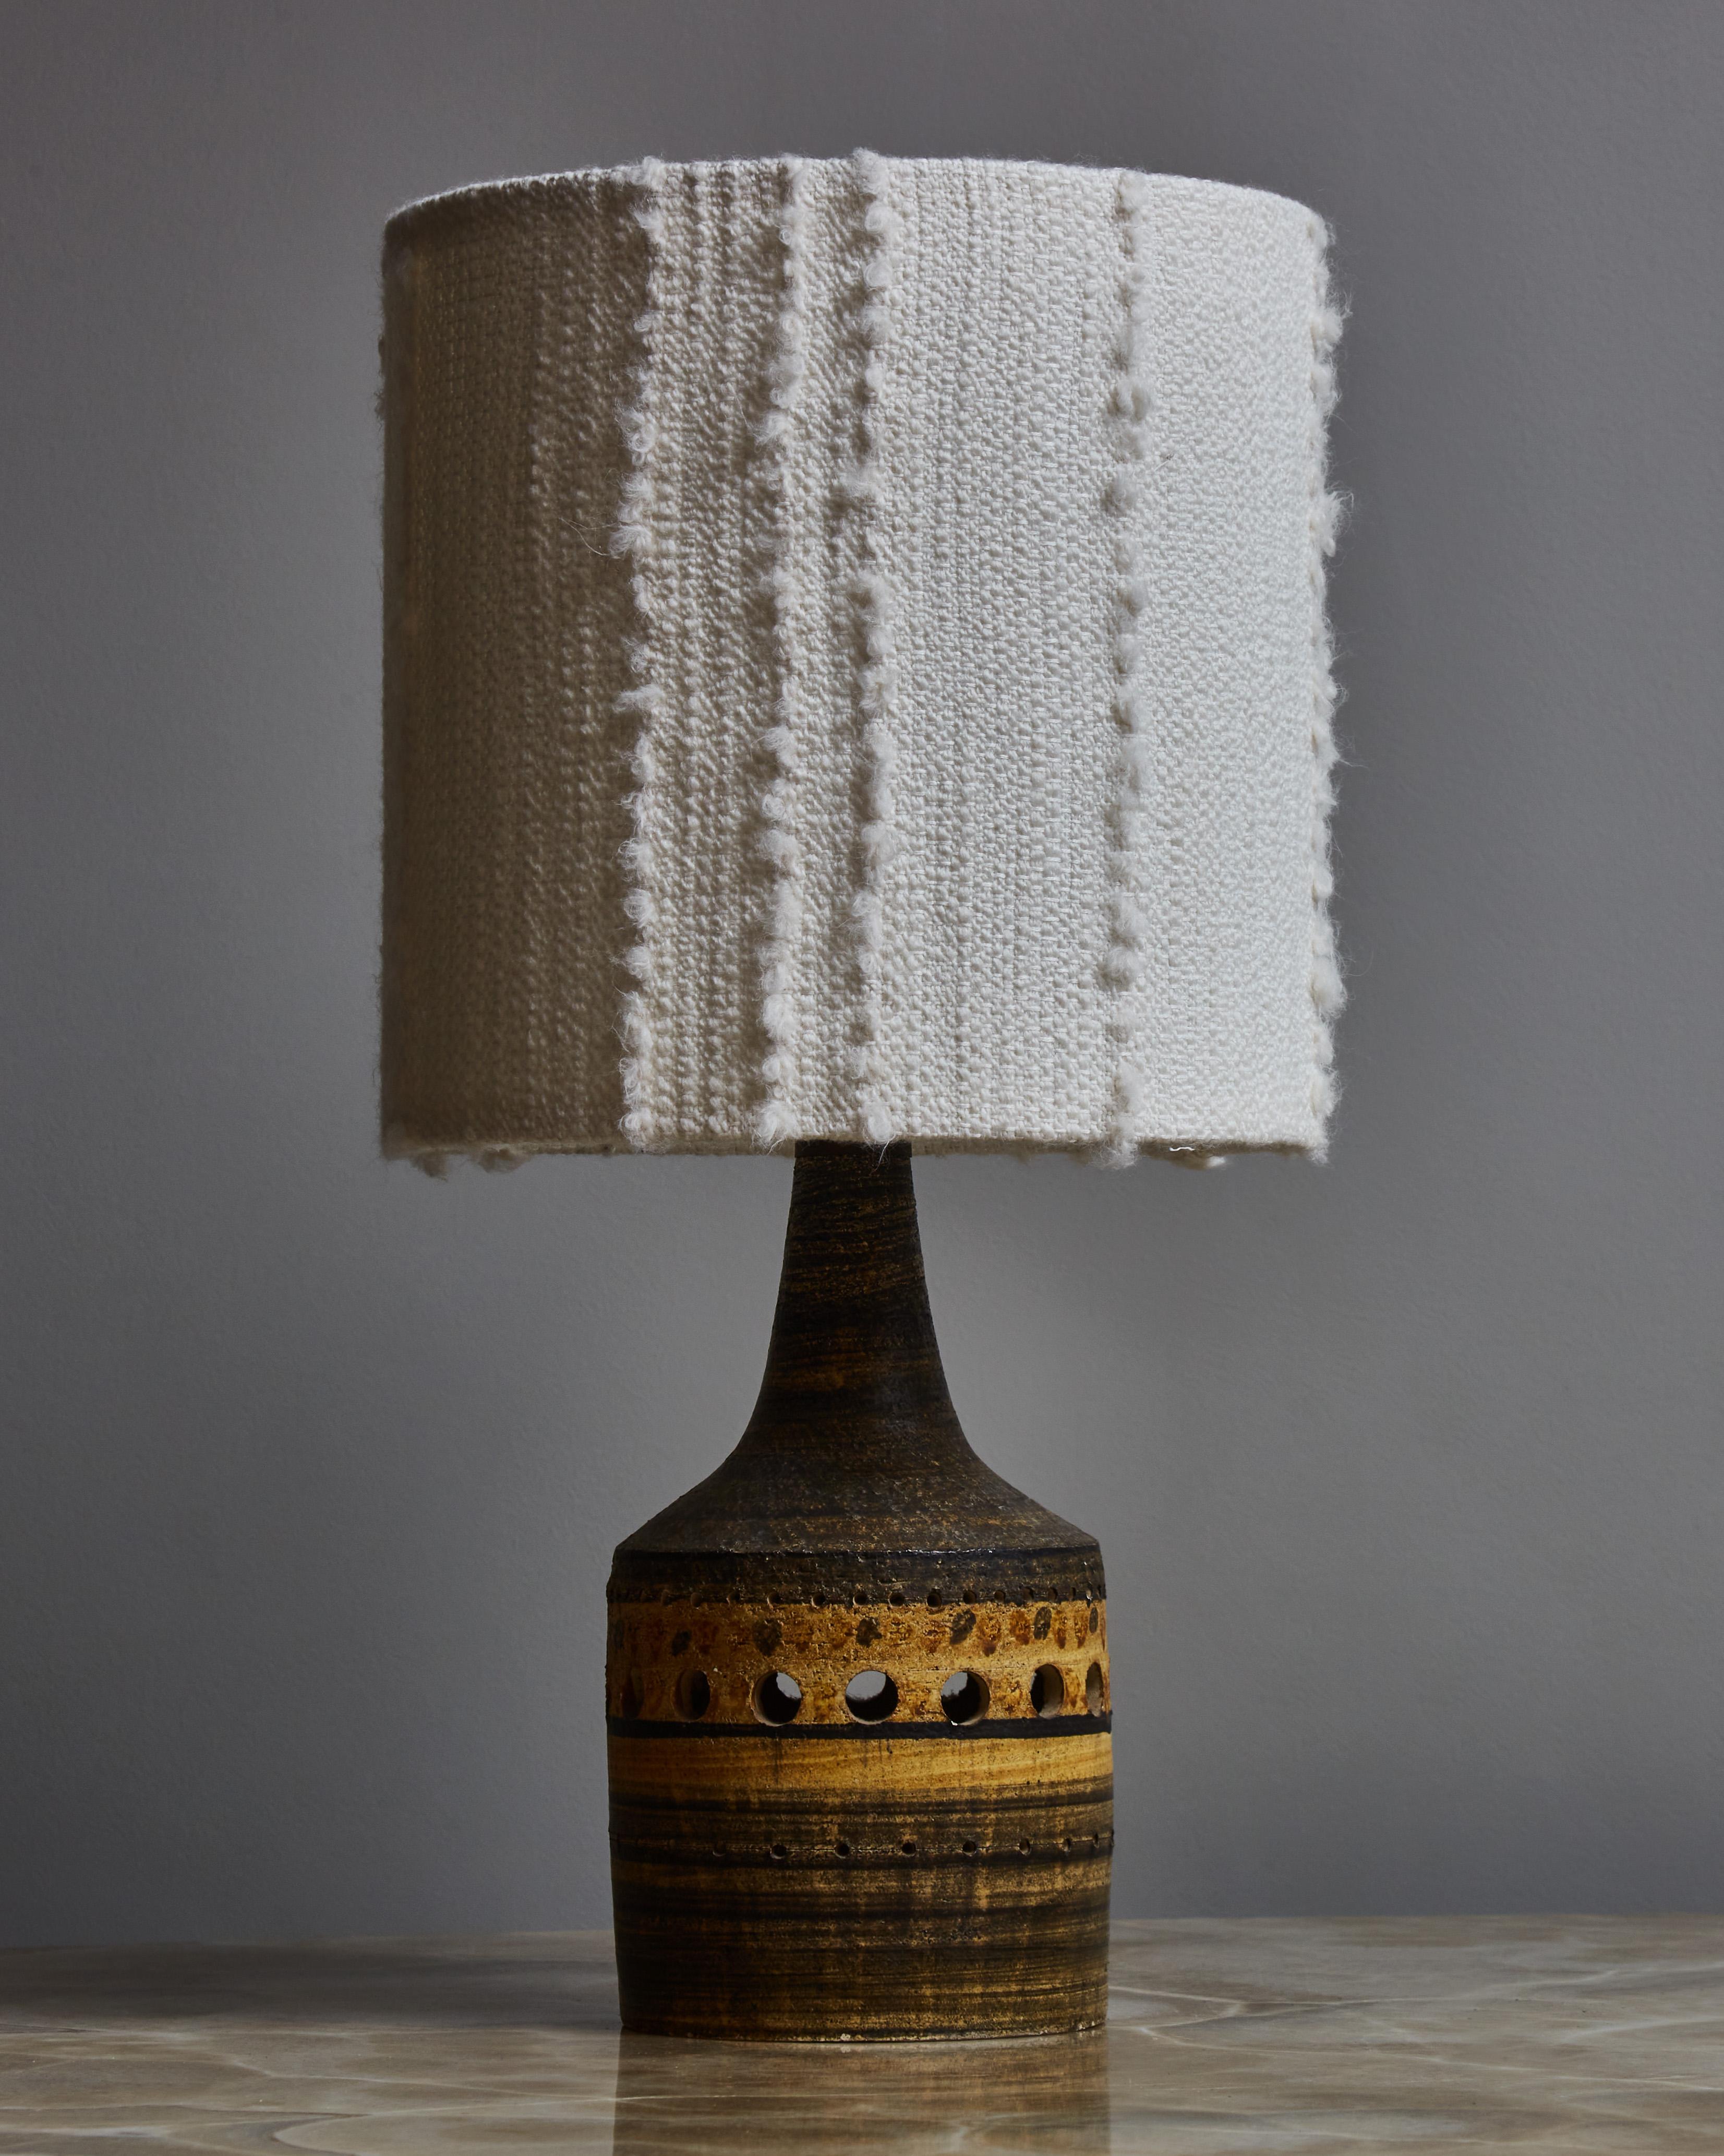 Table lamp in glazed ceramic made by the French artist Georges Pelletier, topped with a new Dedar fabric lamp shade.